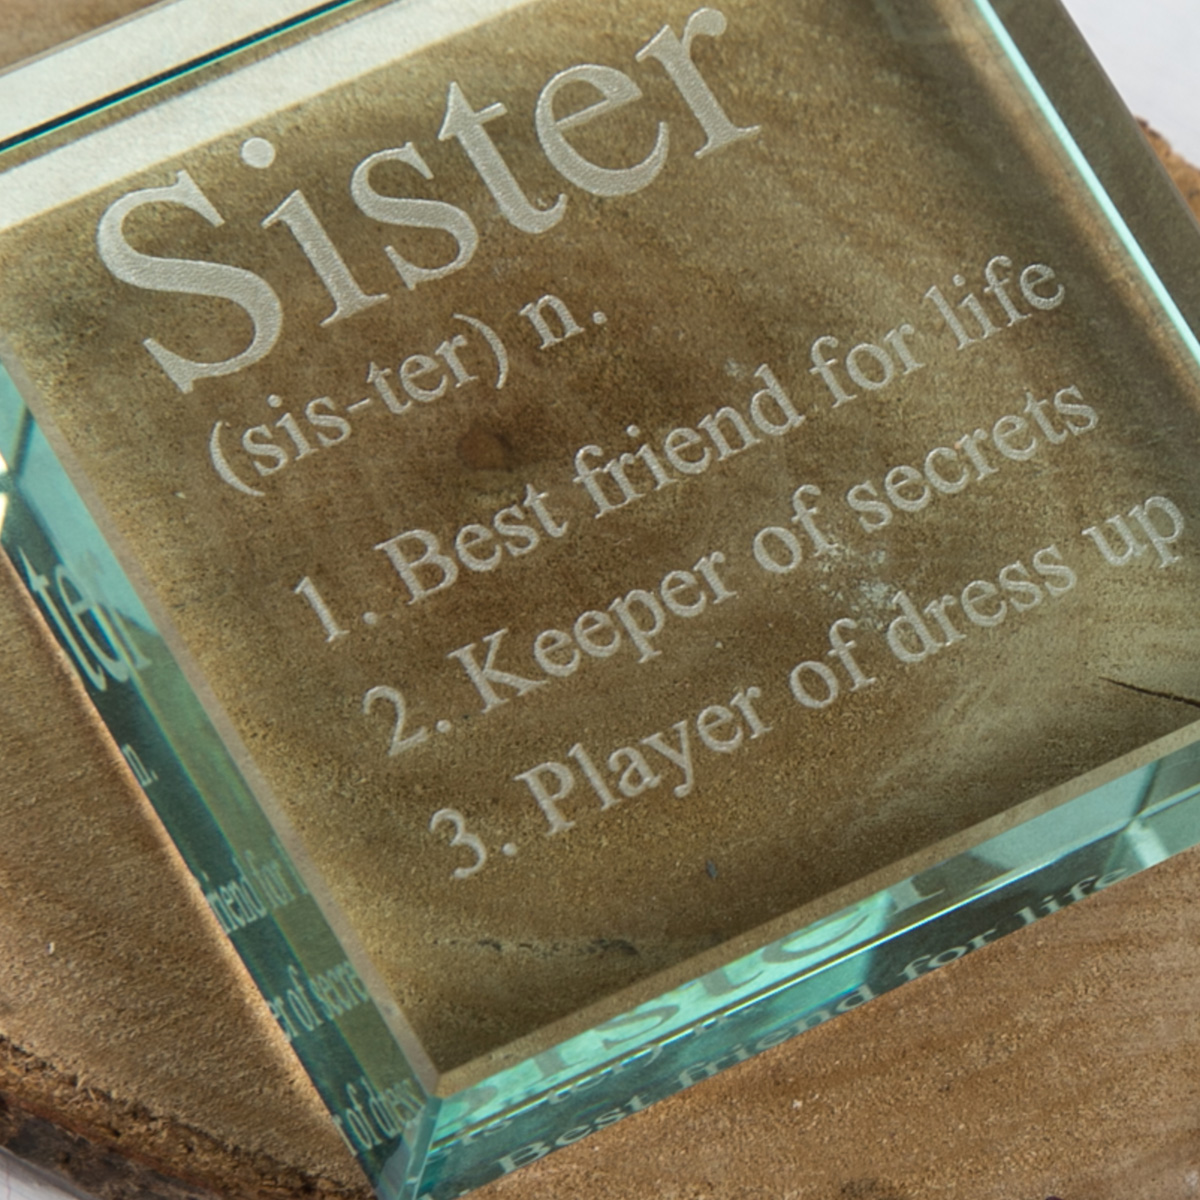 Personalised Glass Token - Sister Meaning